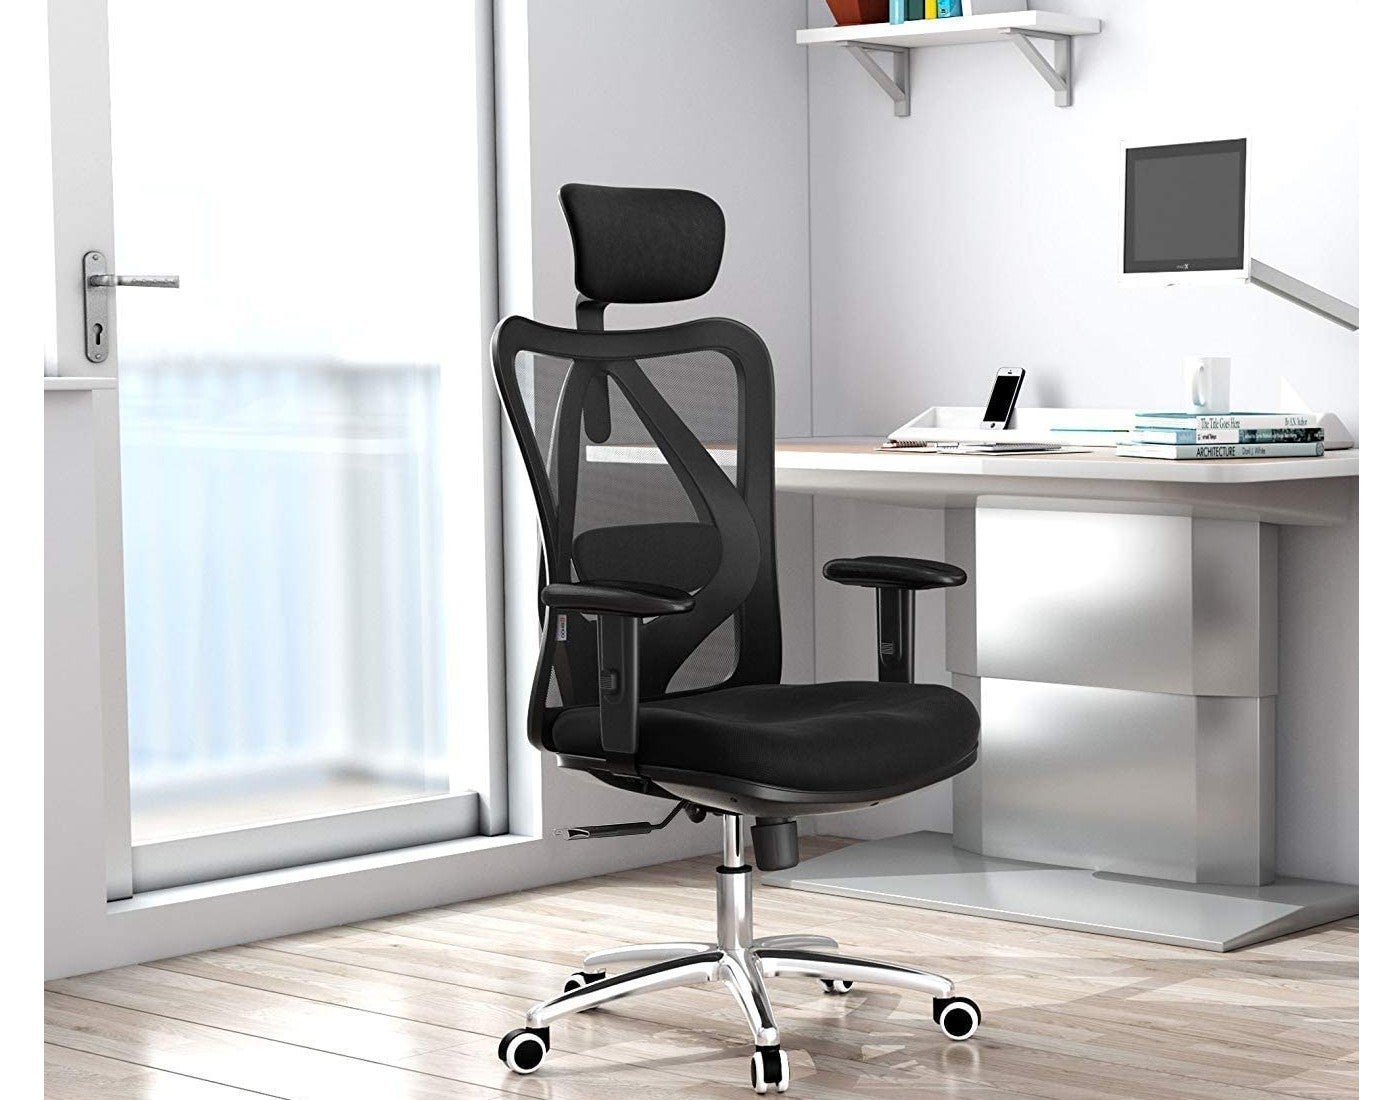 The Best Ergonomic Chairs for the Office